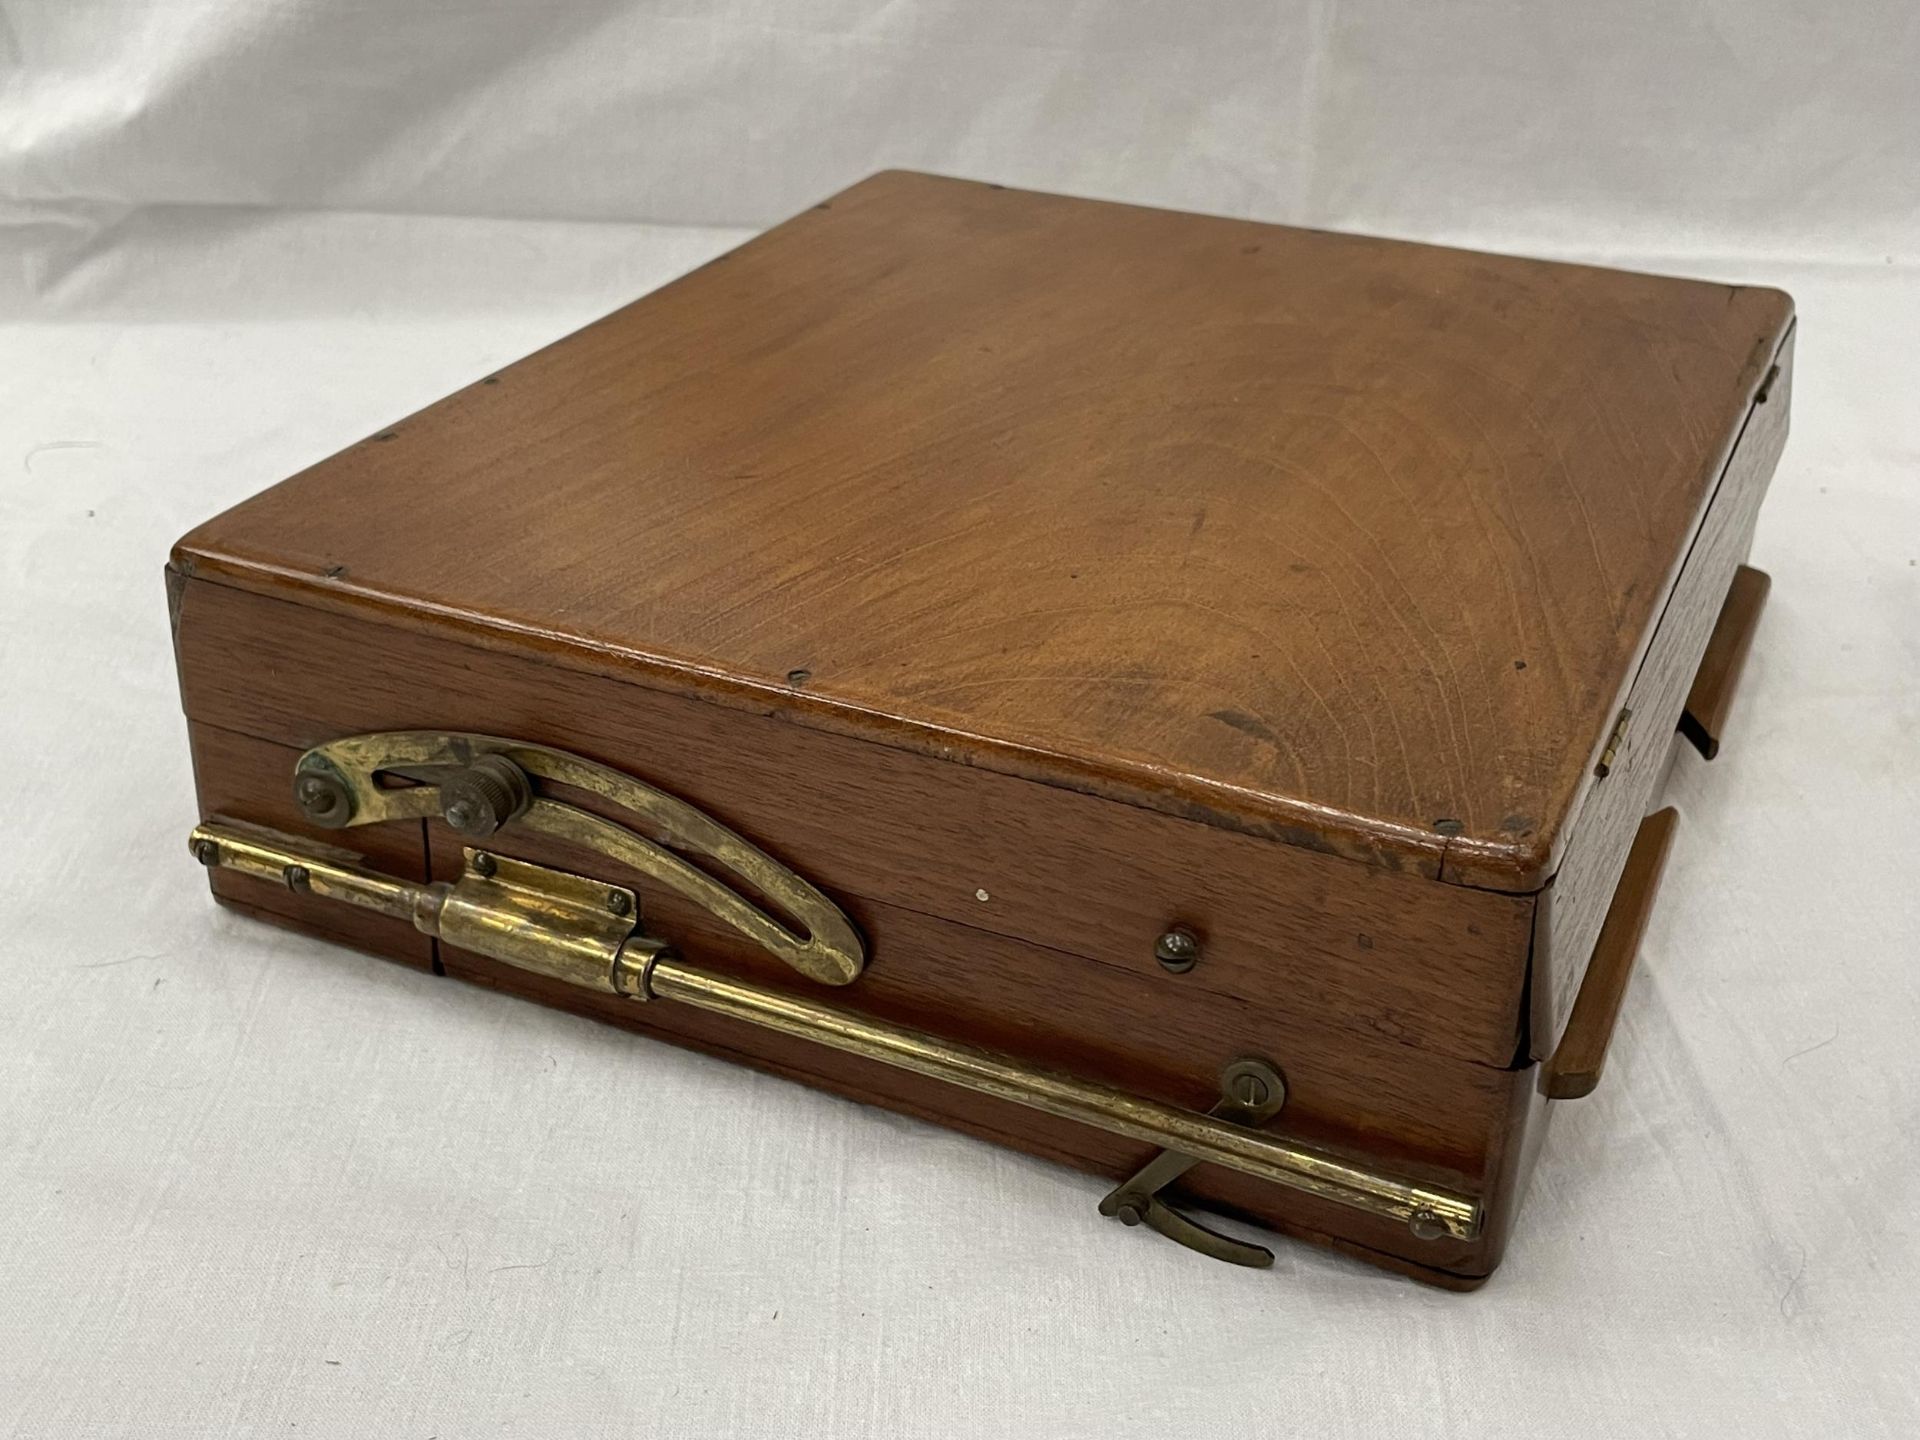 A 19TH CENTURY ARTIST'S FOLDING PAINTING BOX - Image 5 of 6